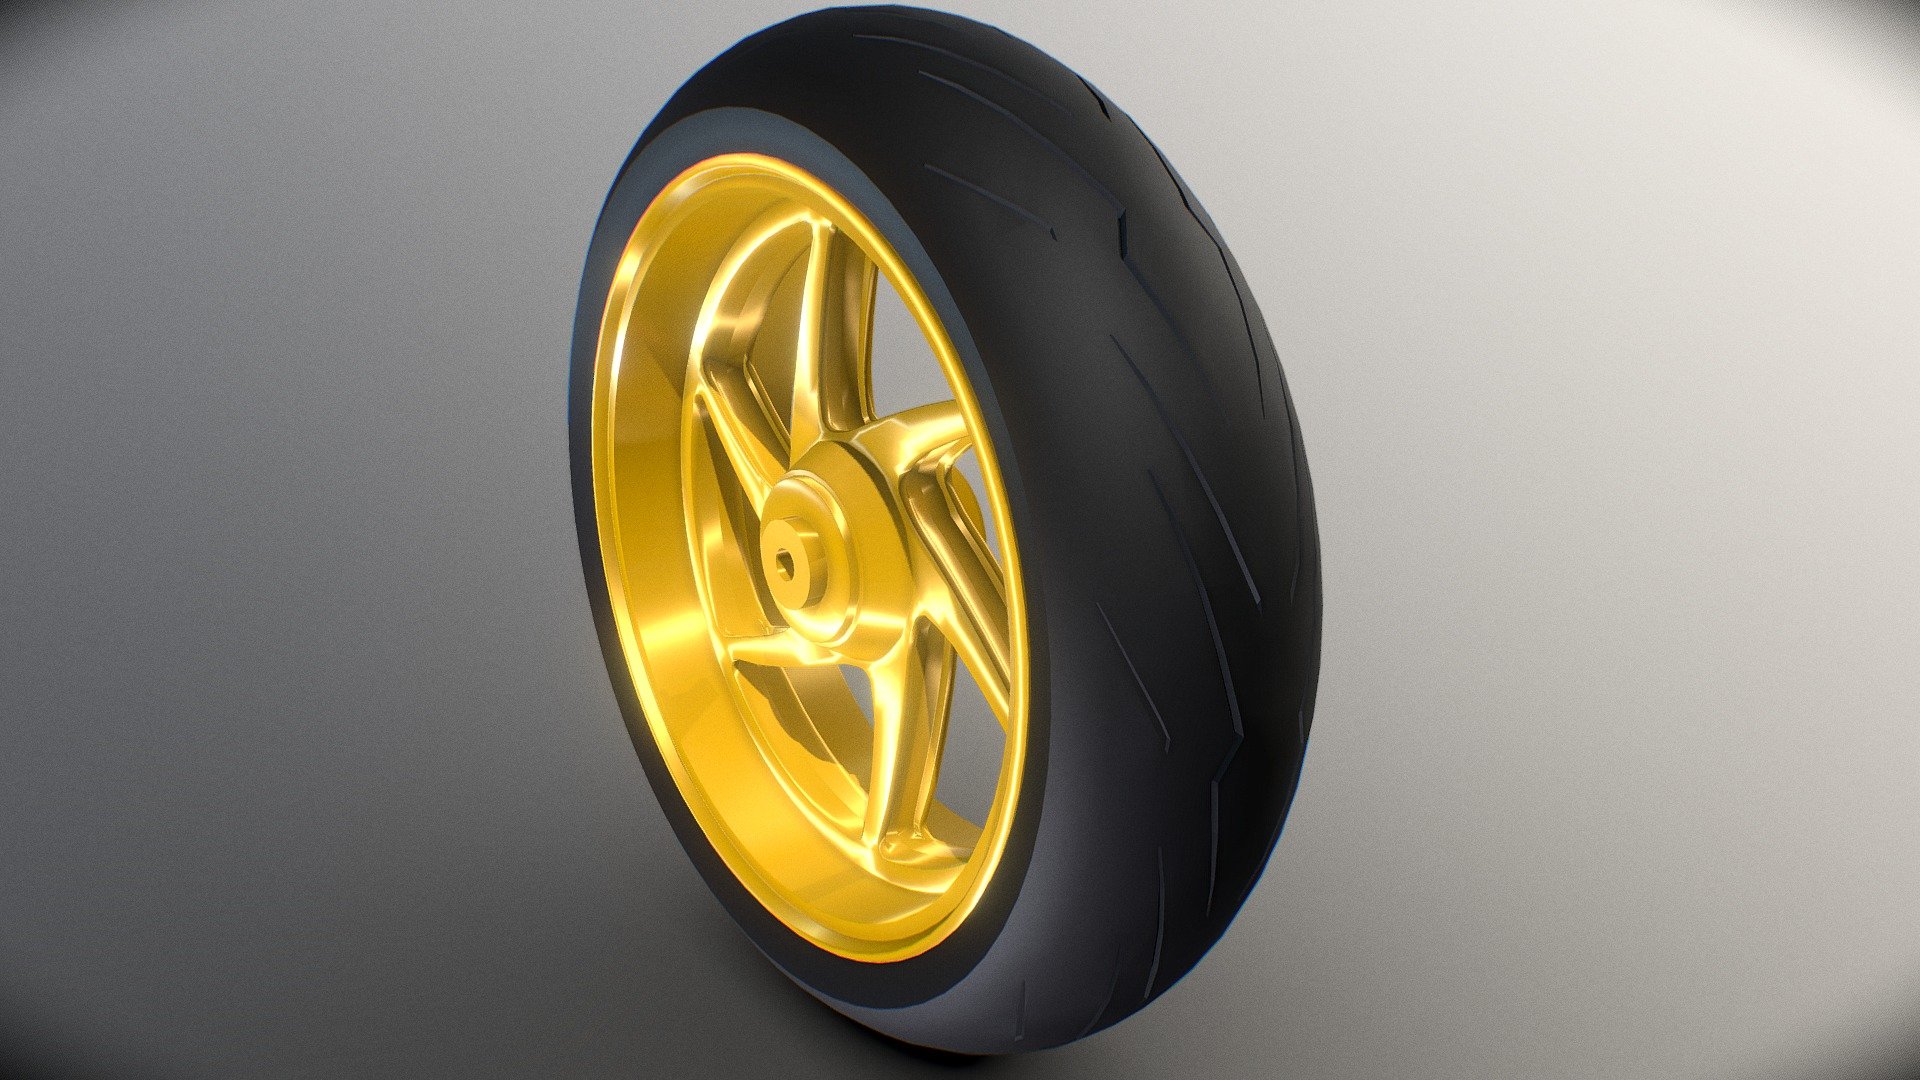 Motorcycle Wheel with Tire and Details
Modeled in Low Poly for Games - Wheel Tire Motorcycle - 3D model by mchornet 3d model